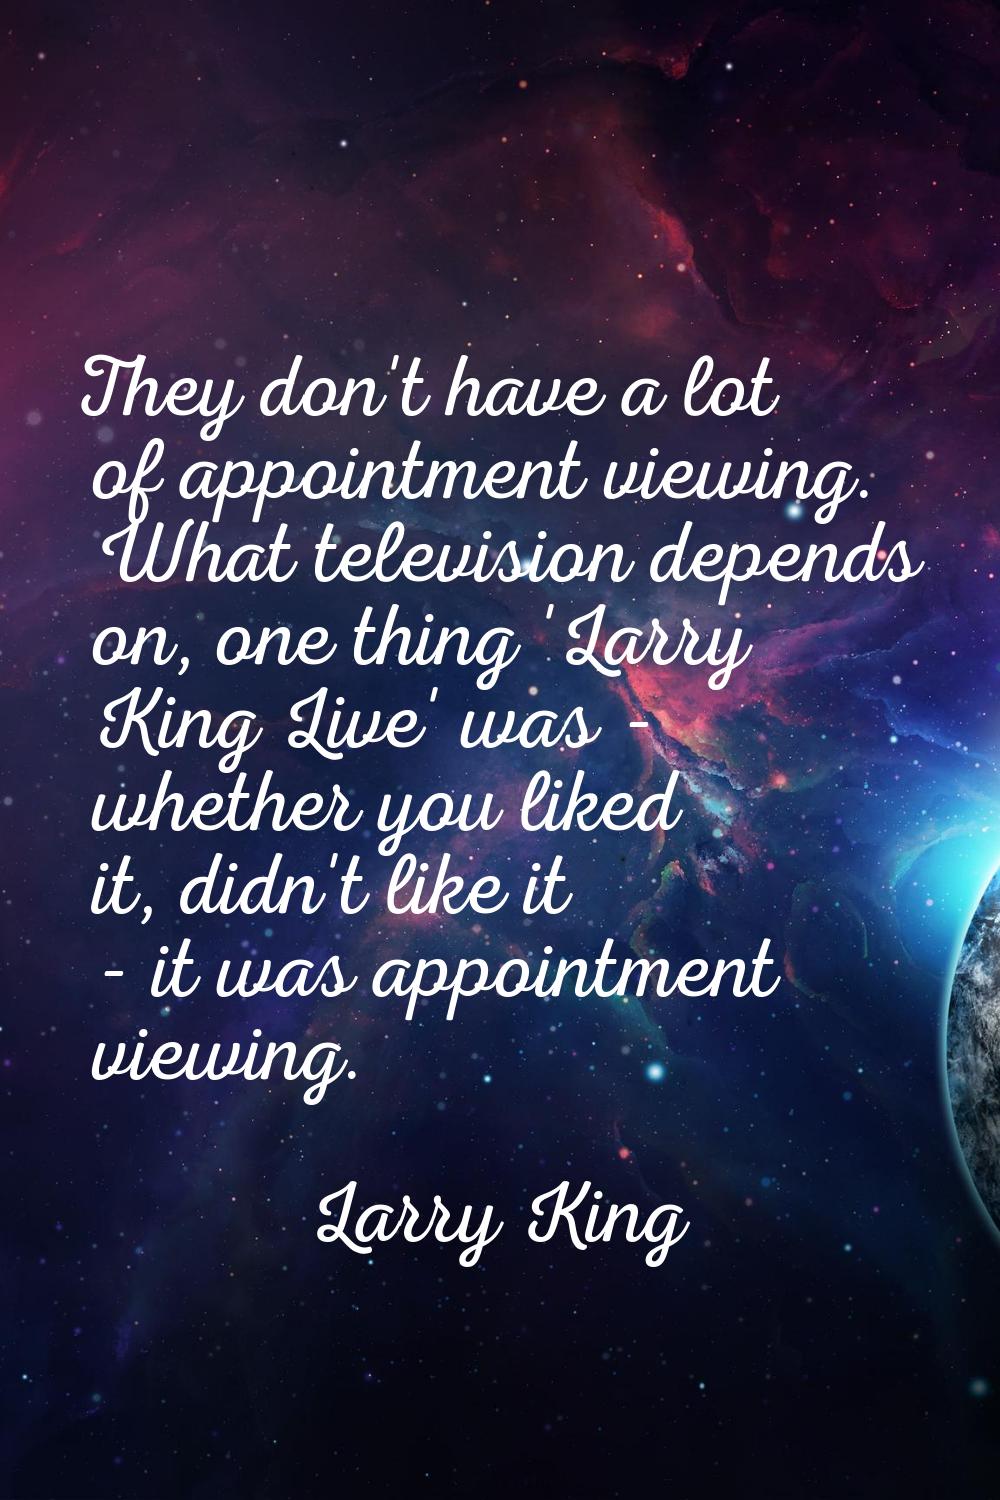 They don't have a lot of appointment viewing. What television depends on, one thing 'Larry King Liv